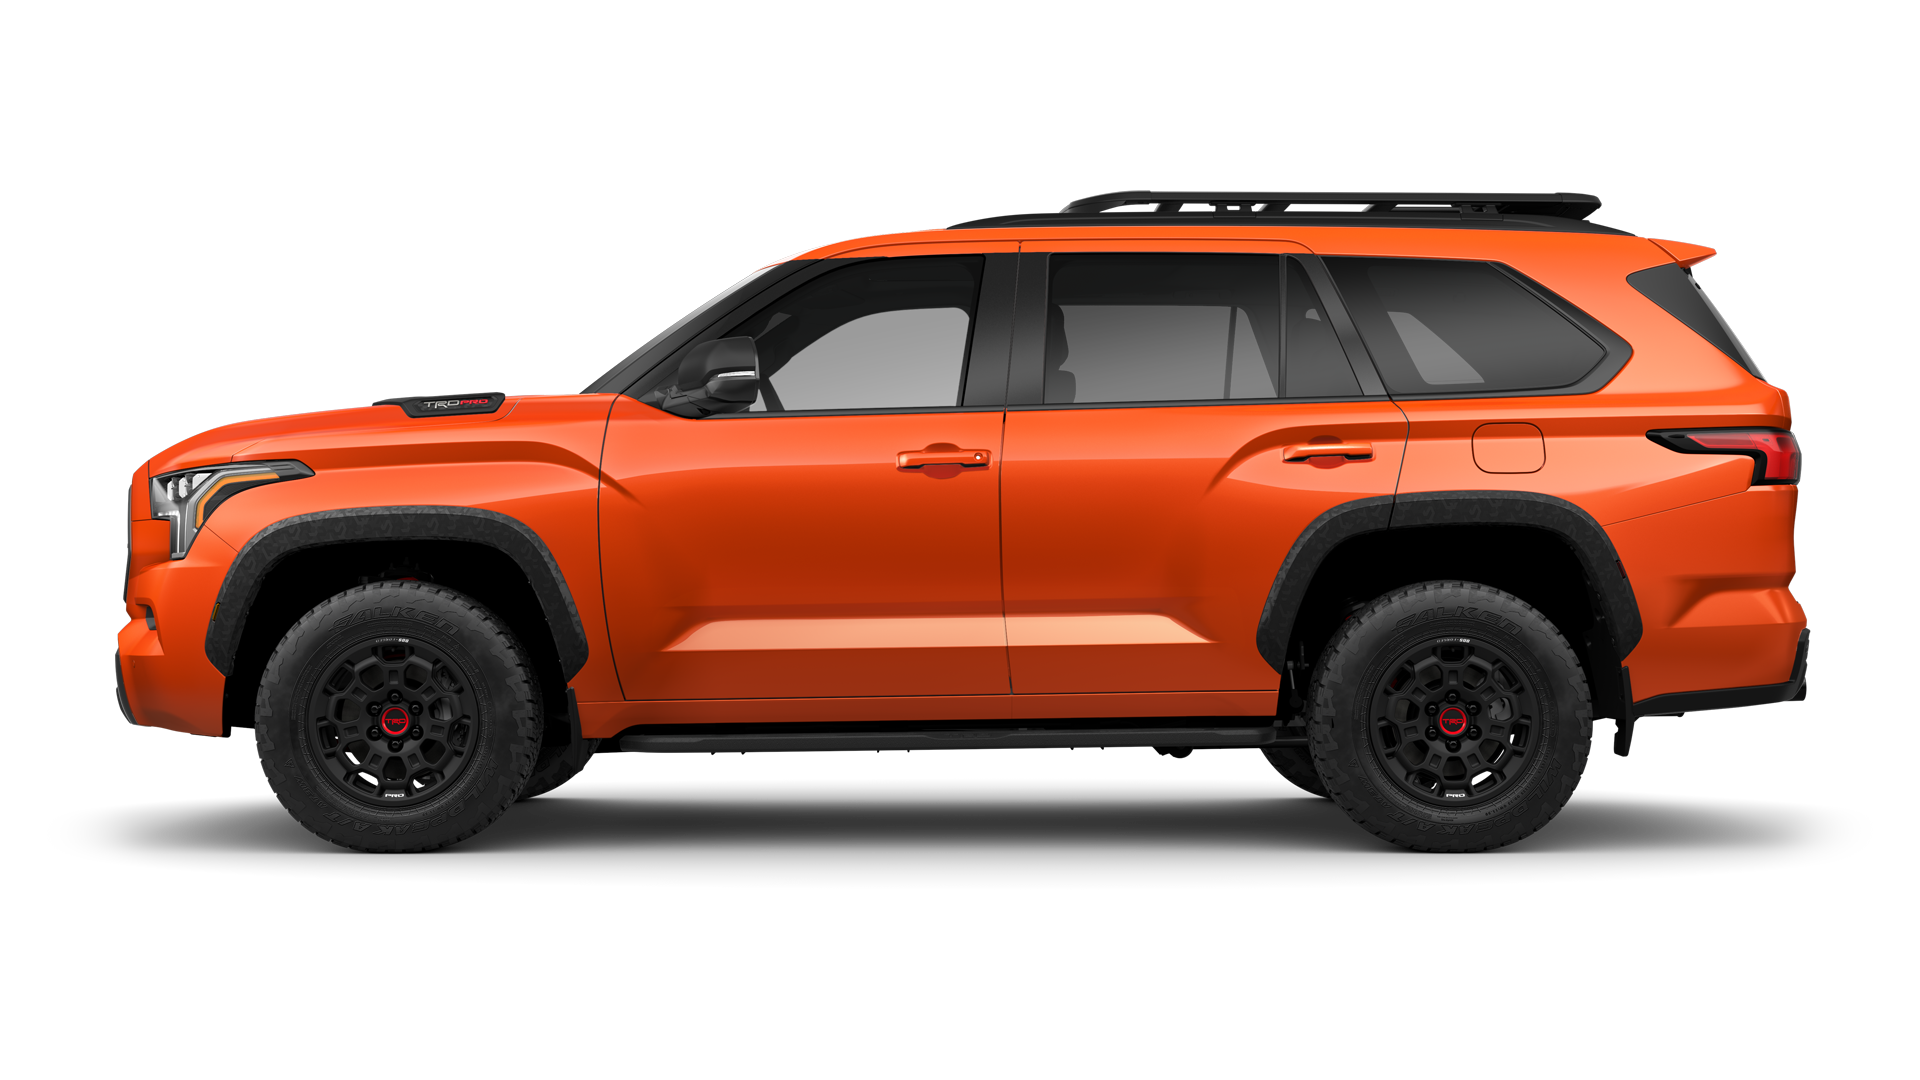 Toyota and Original Grain Partner to Create the Solar Octane Collection